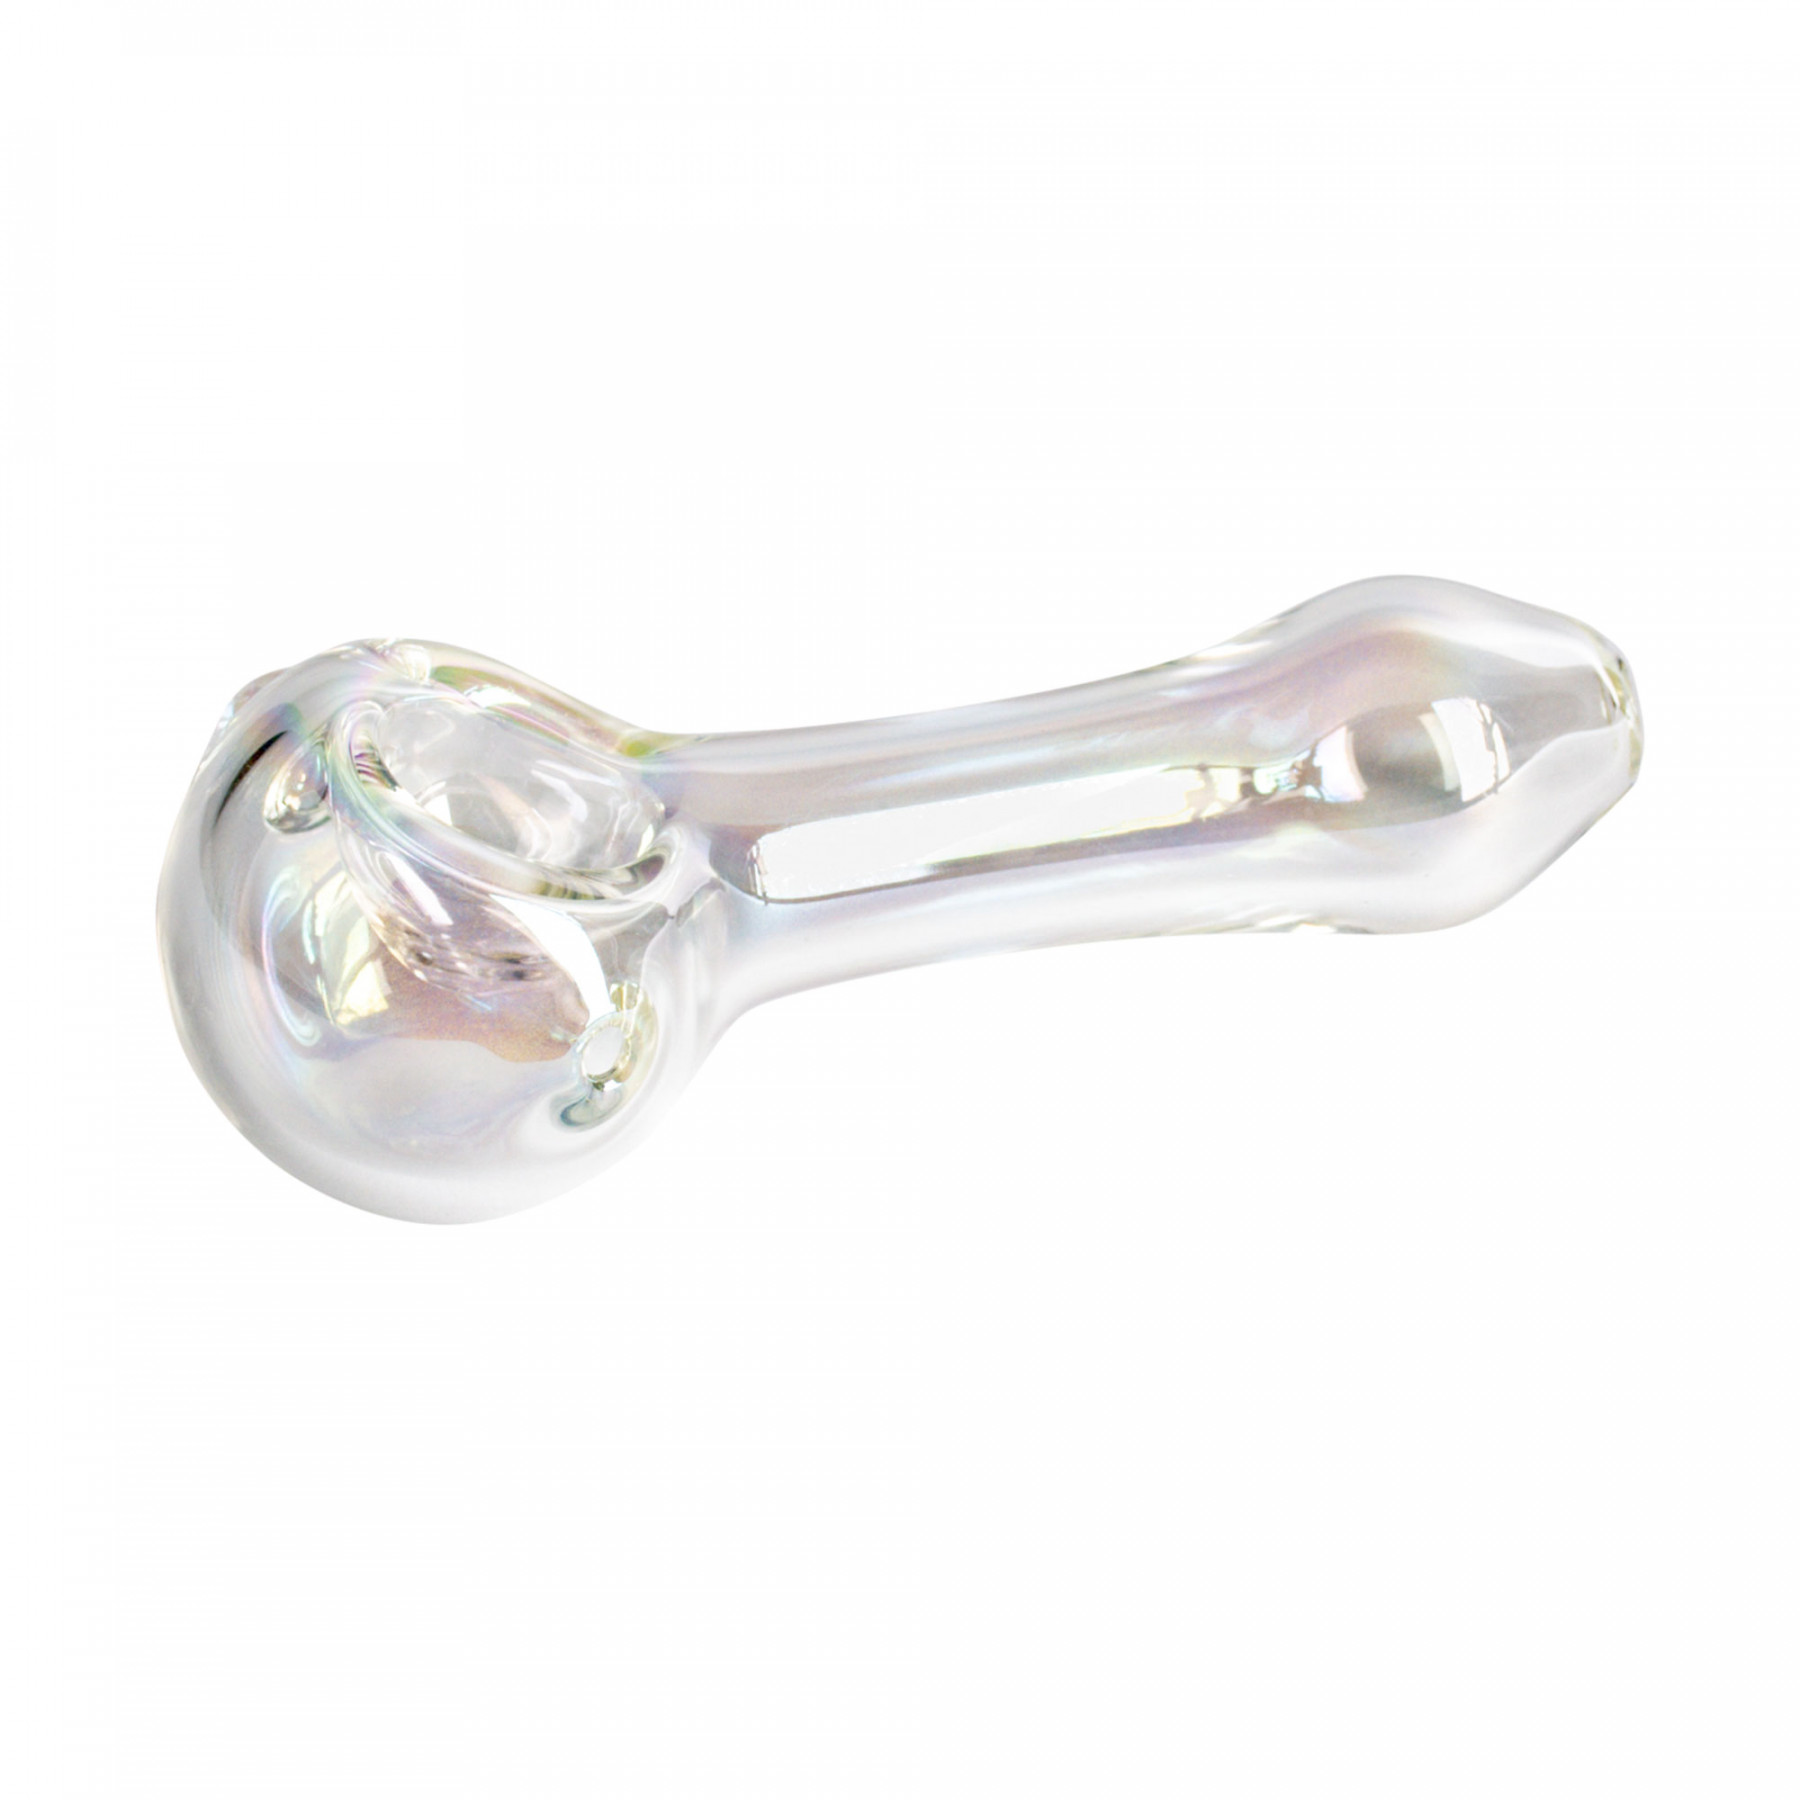 4" Iridescent Large Spoon Hand Pipe